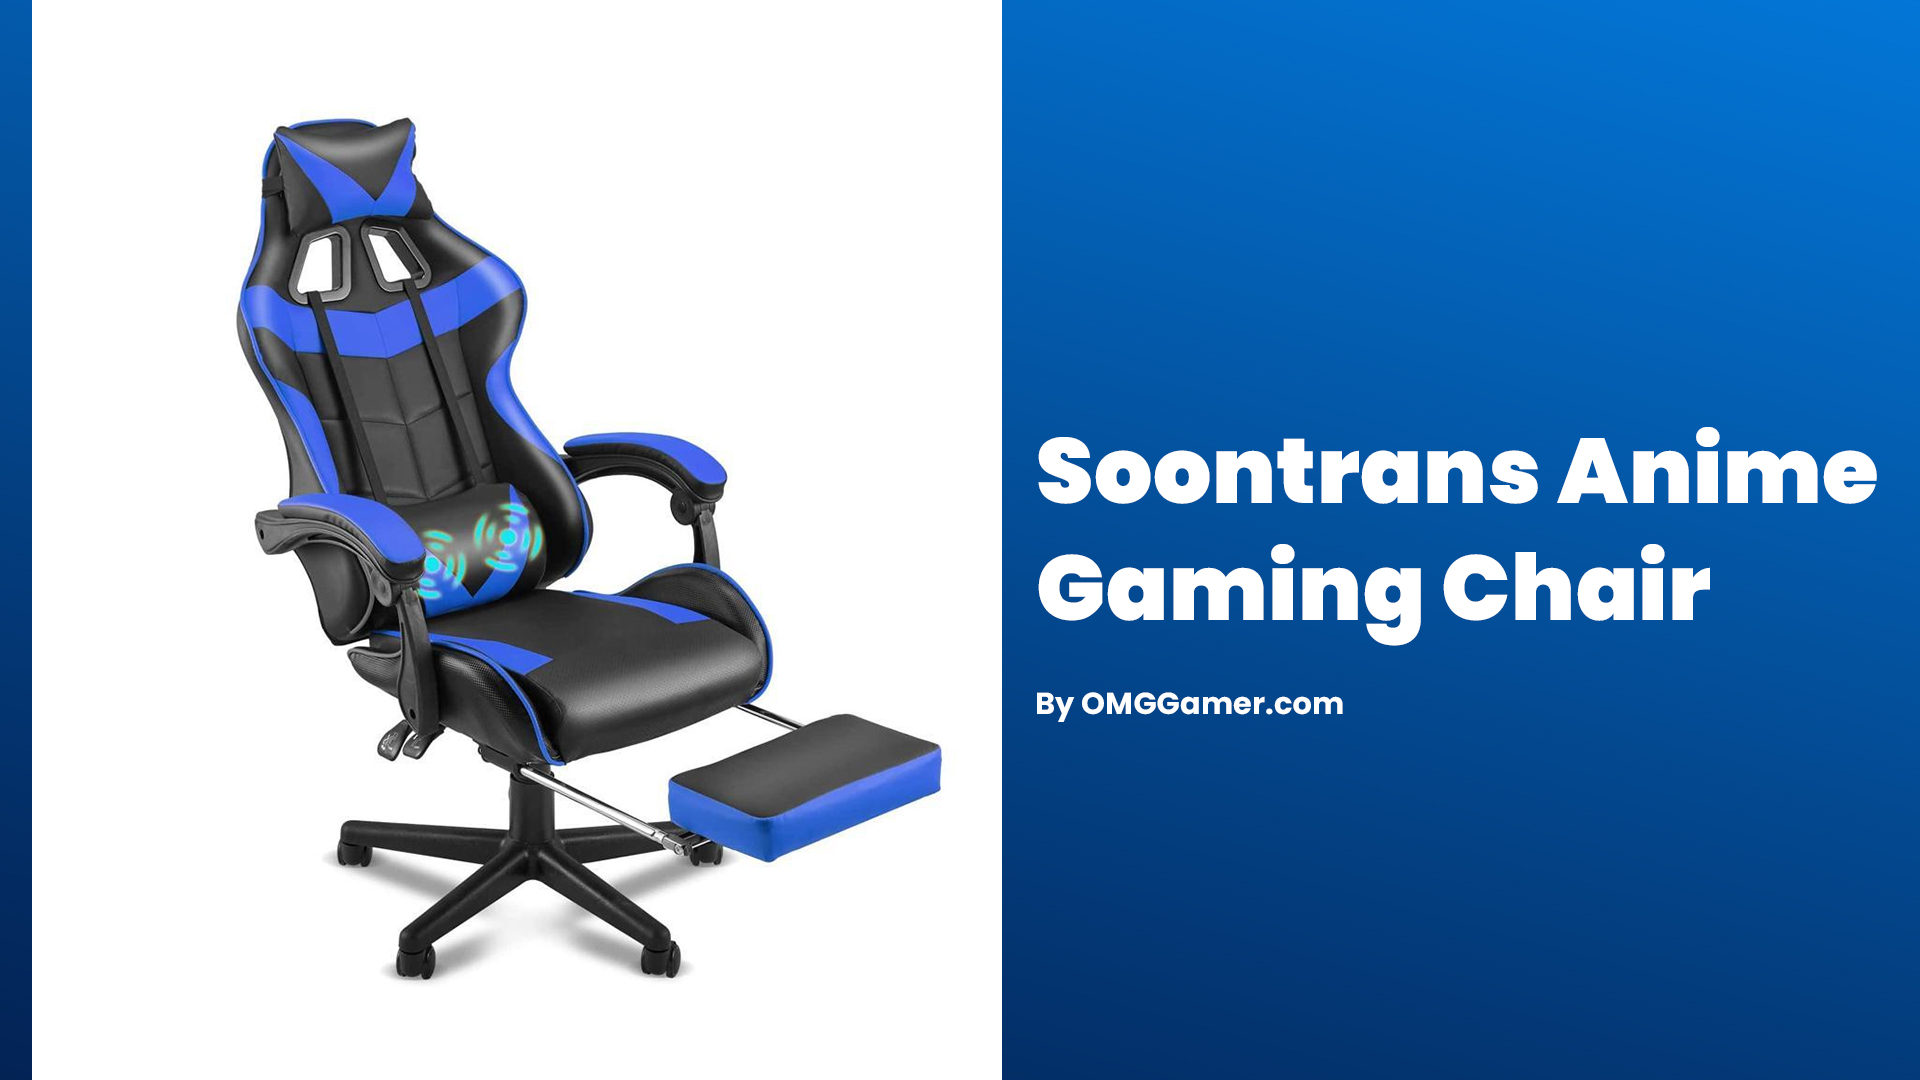 Soontrans Anime Gaming Chair